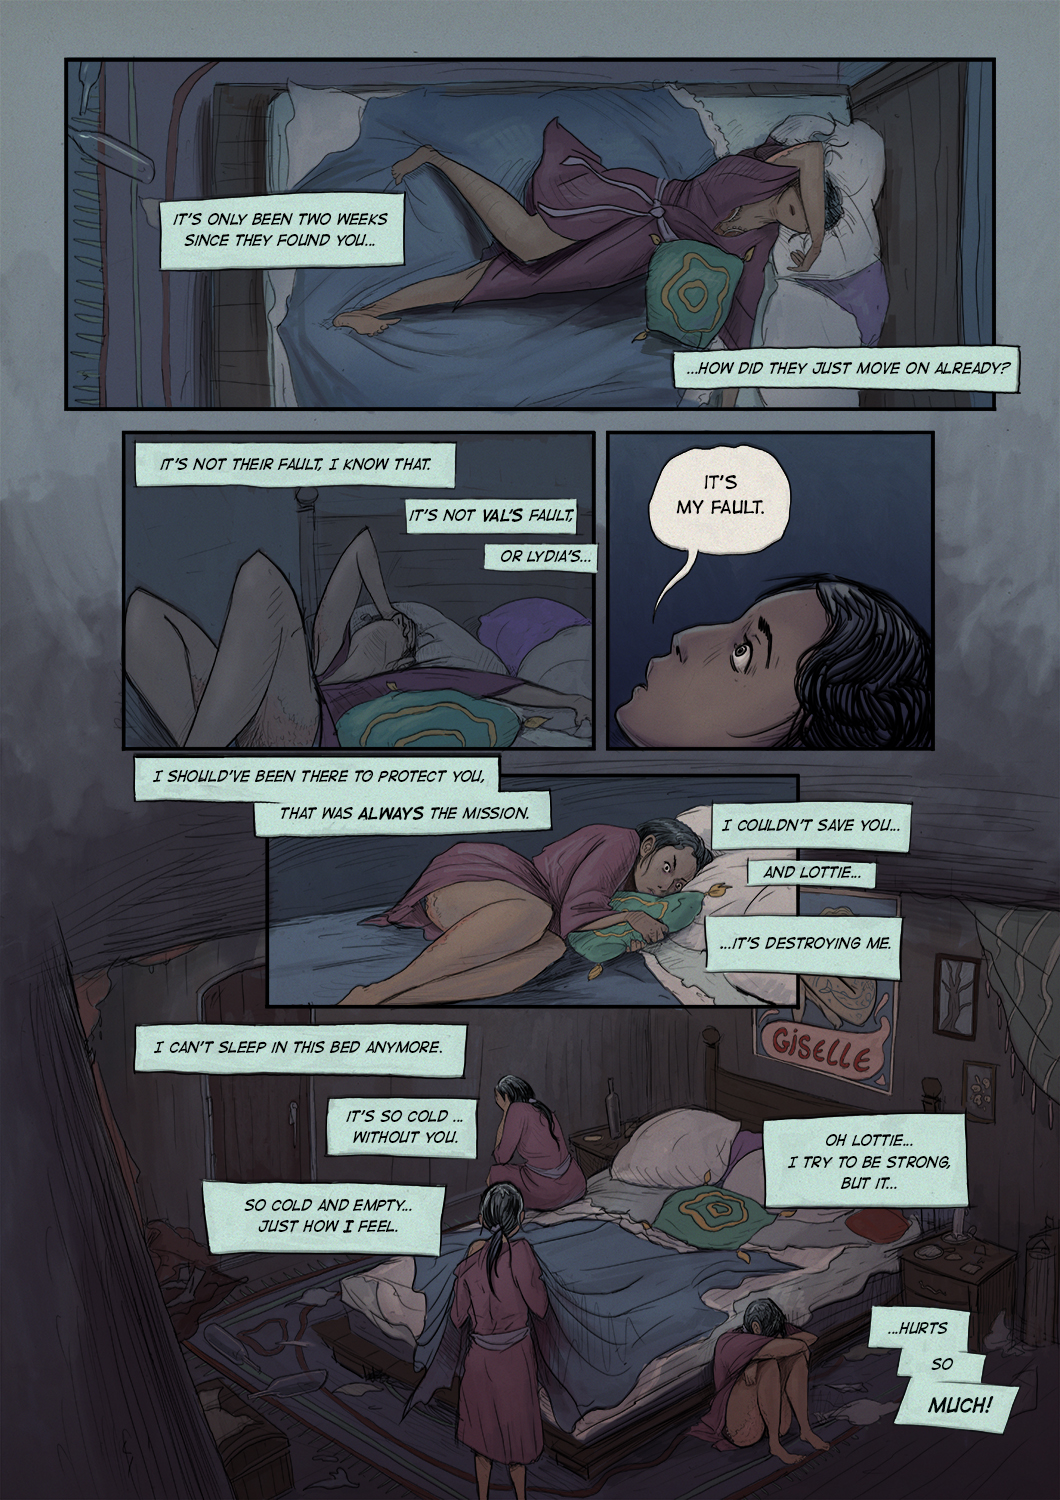 WaterFront chapter two, page 7